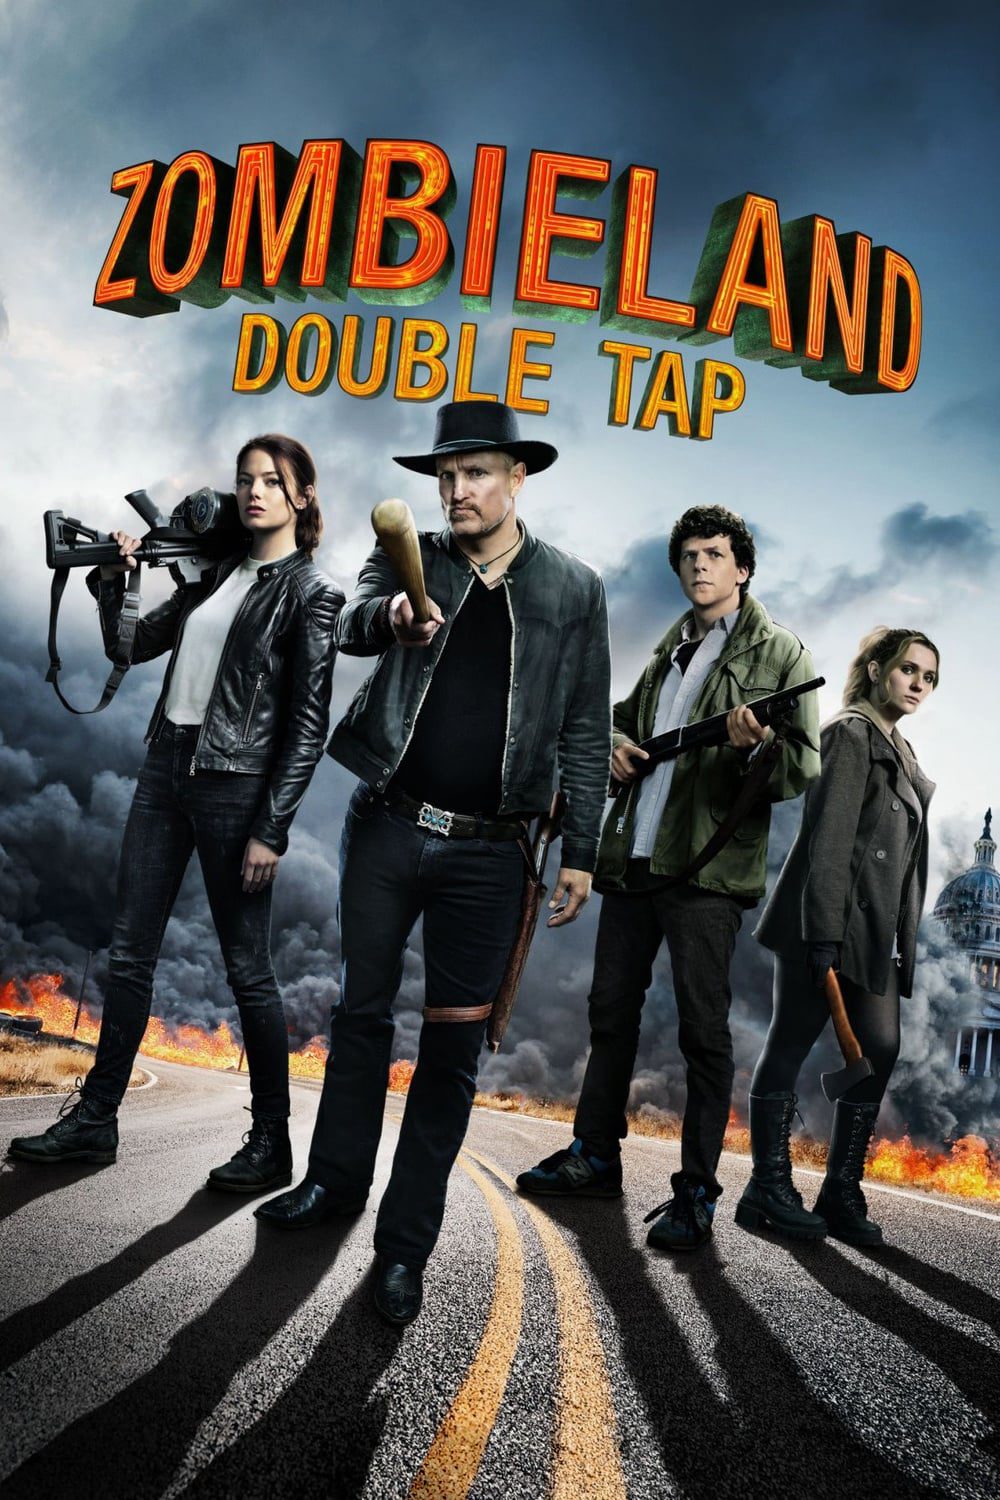 Poster for the movie "Zombieland: Double Tap"